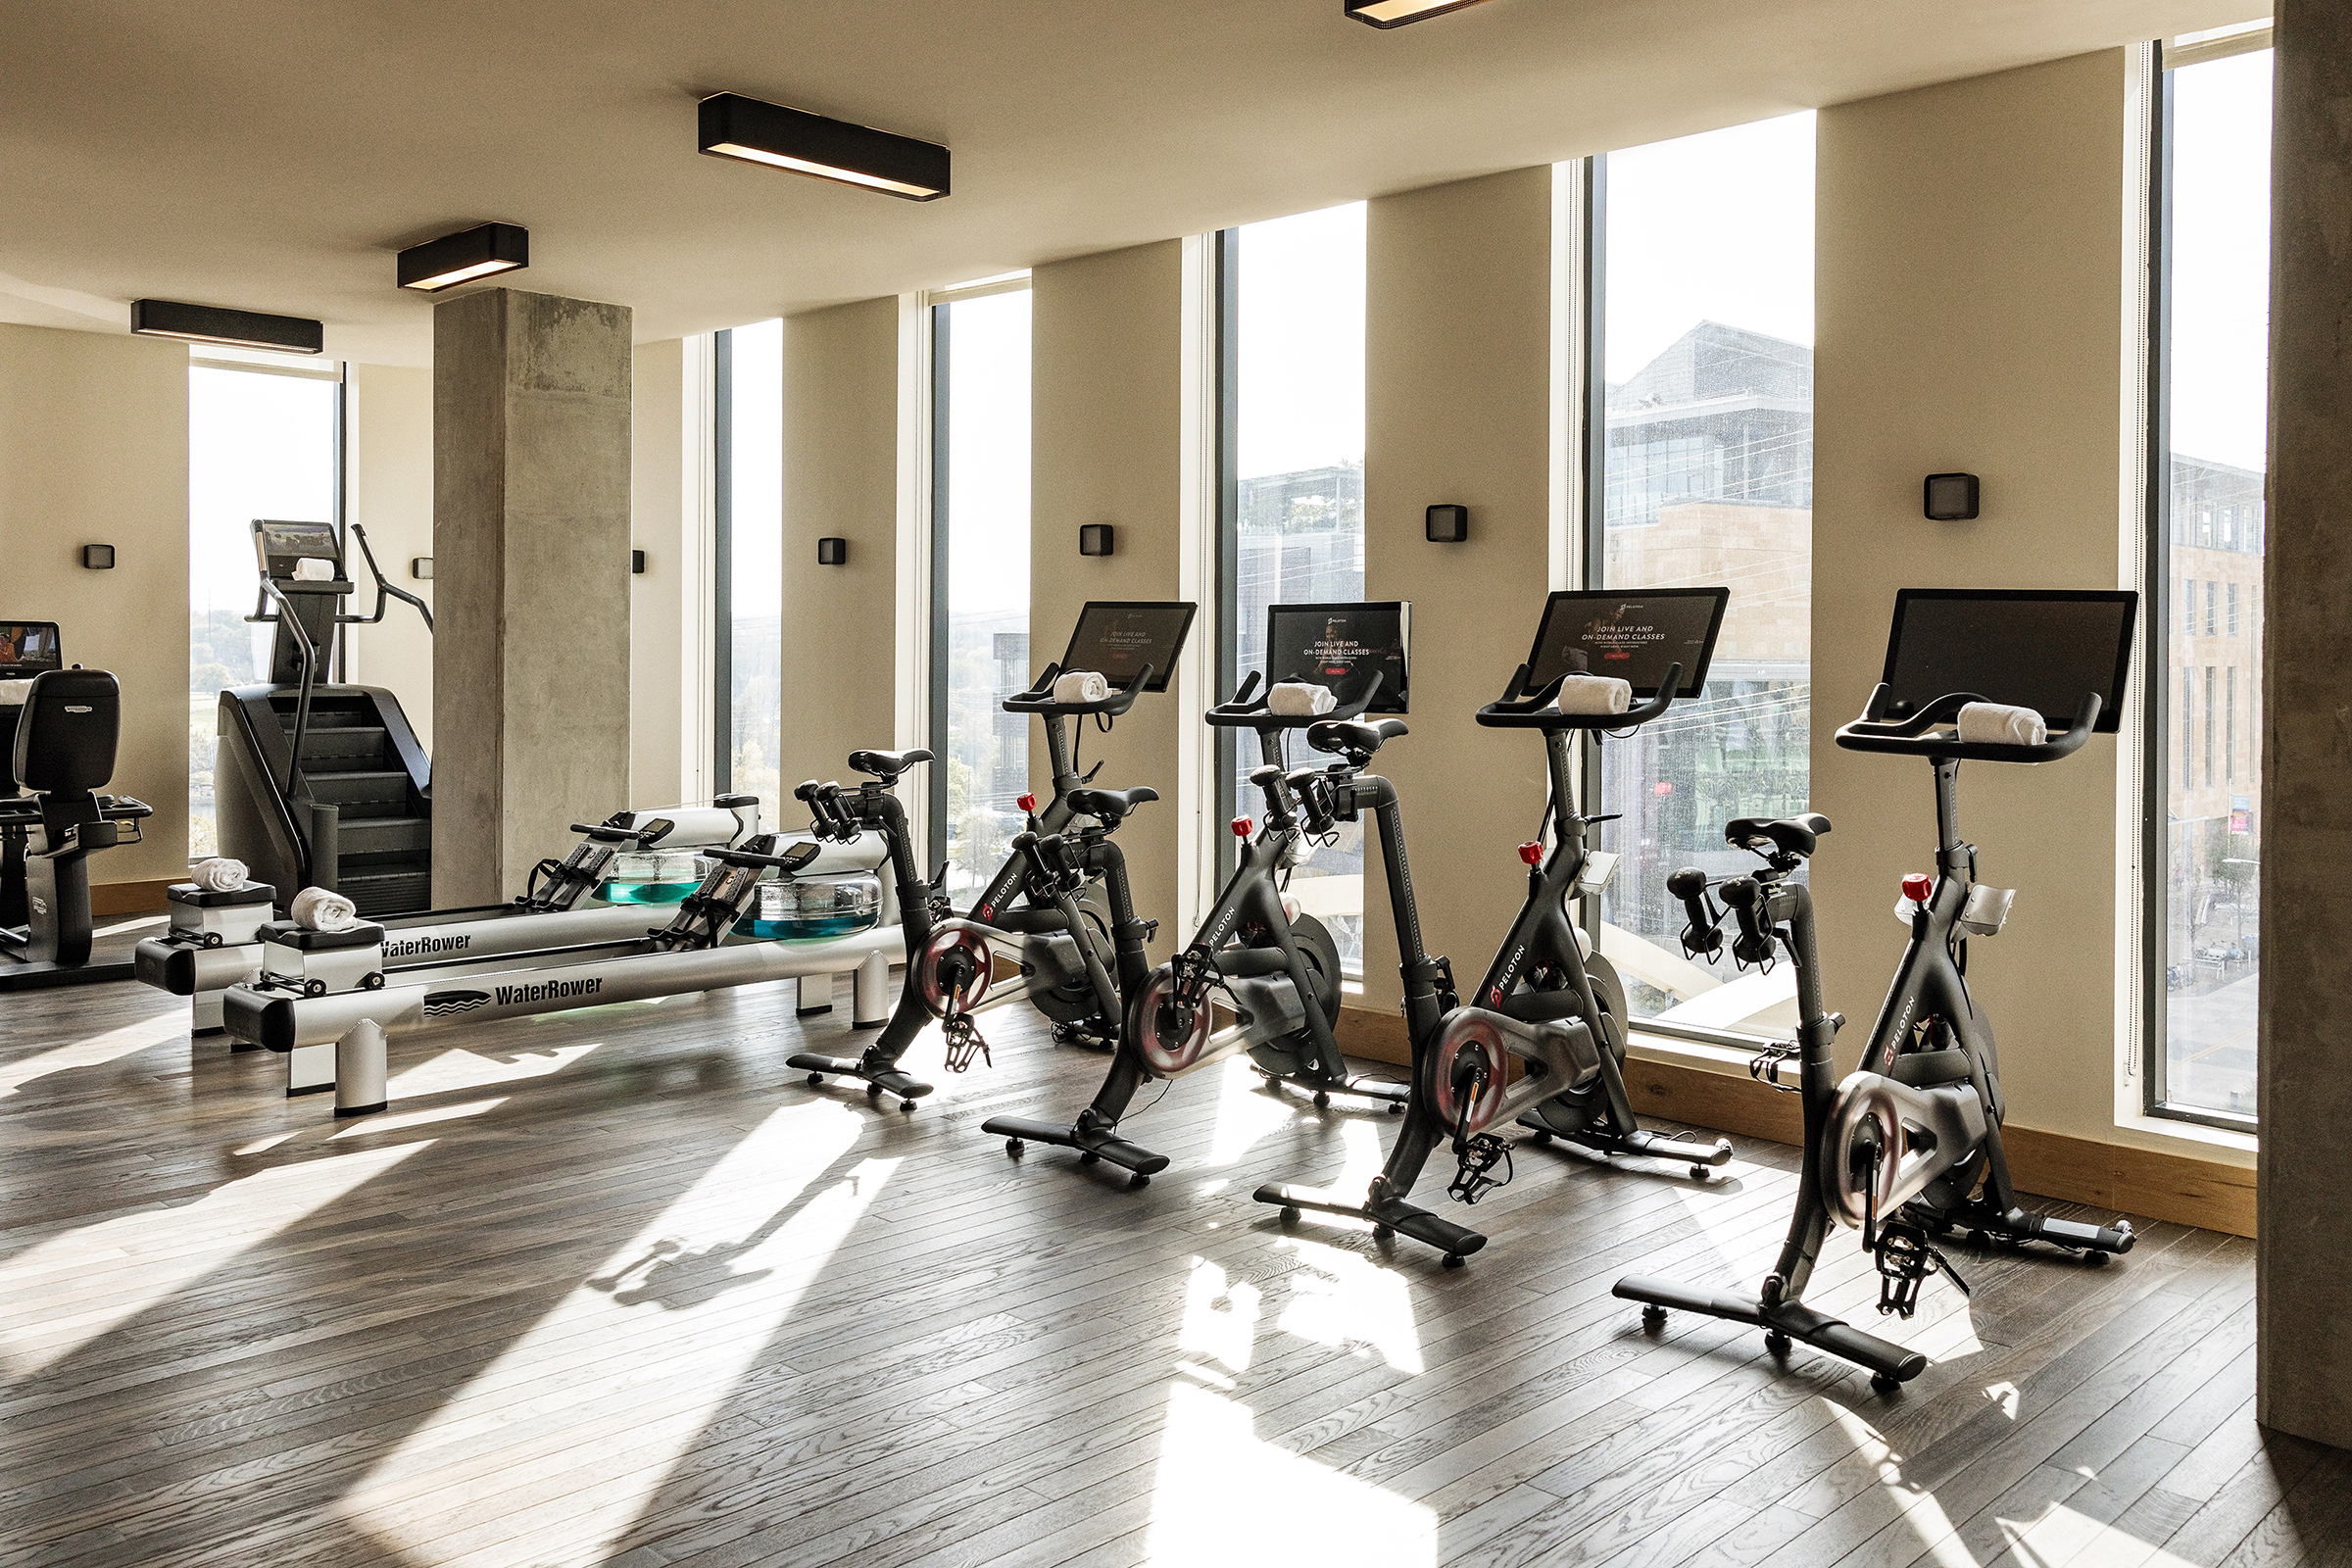 Inside the fitness center on the fourth floor of the Proper Hotel in austin